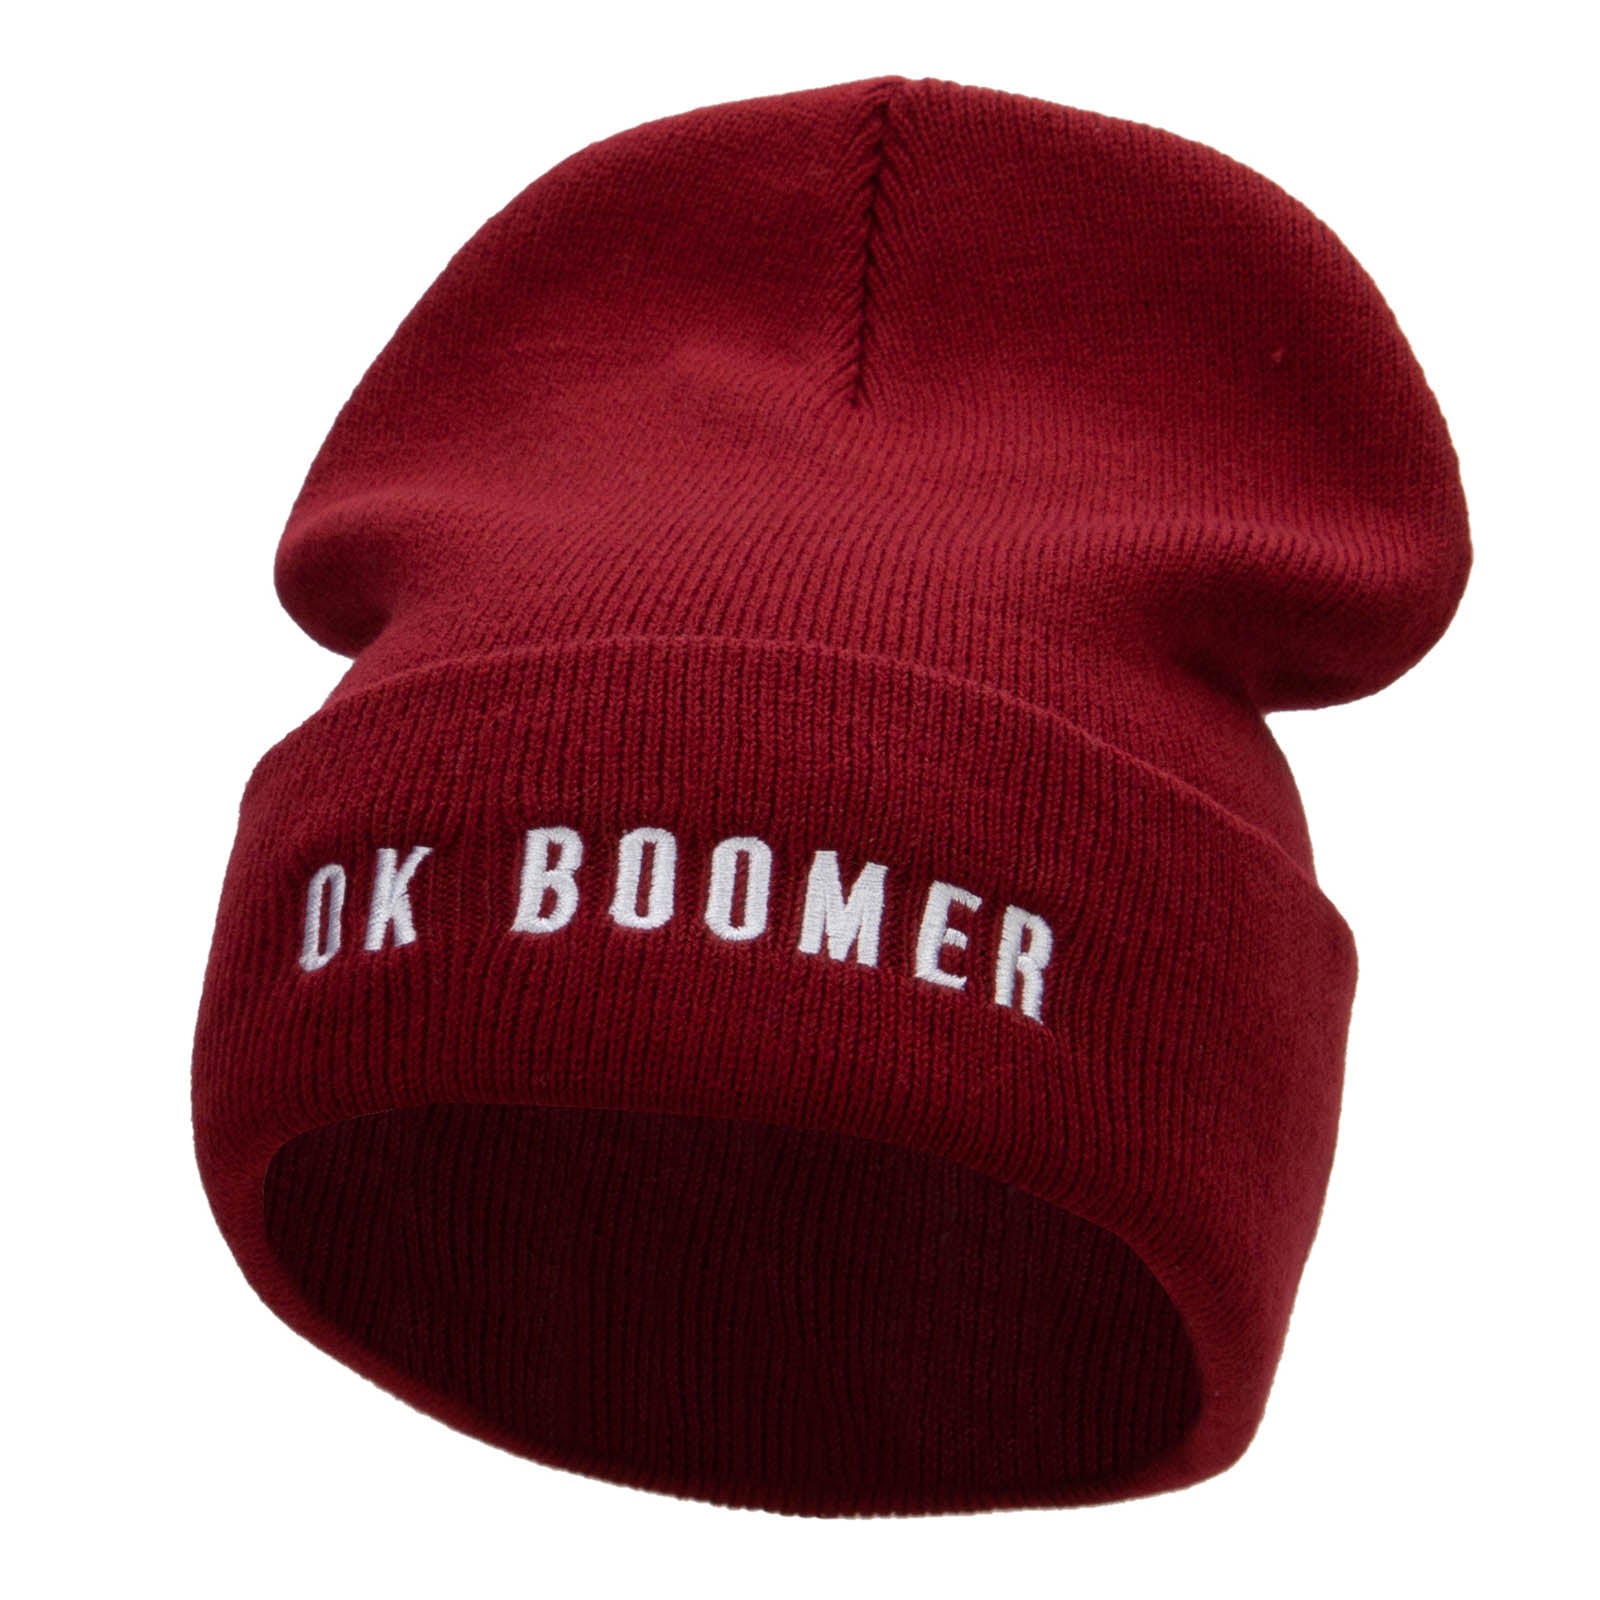 OK BOOMER Embroidered 12 Inch Long Knitted Beanie - Maroon OSFM